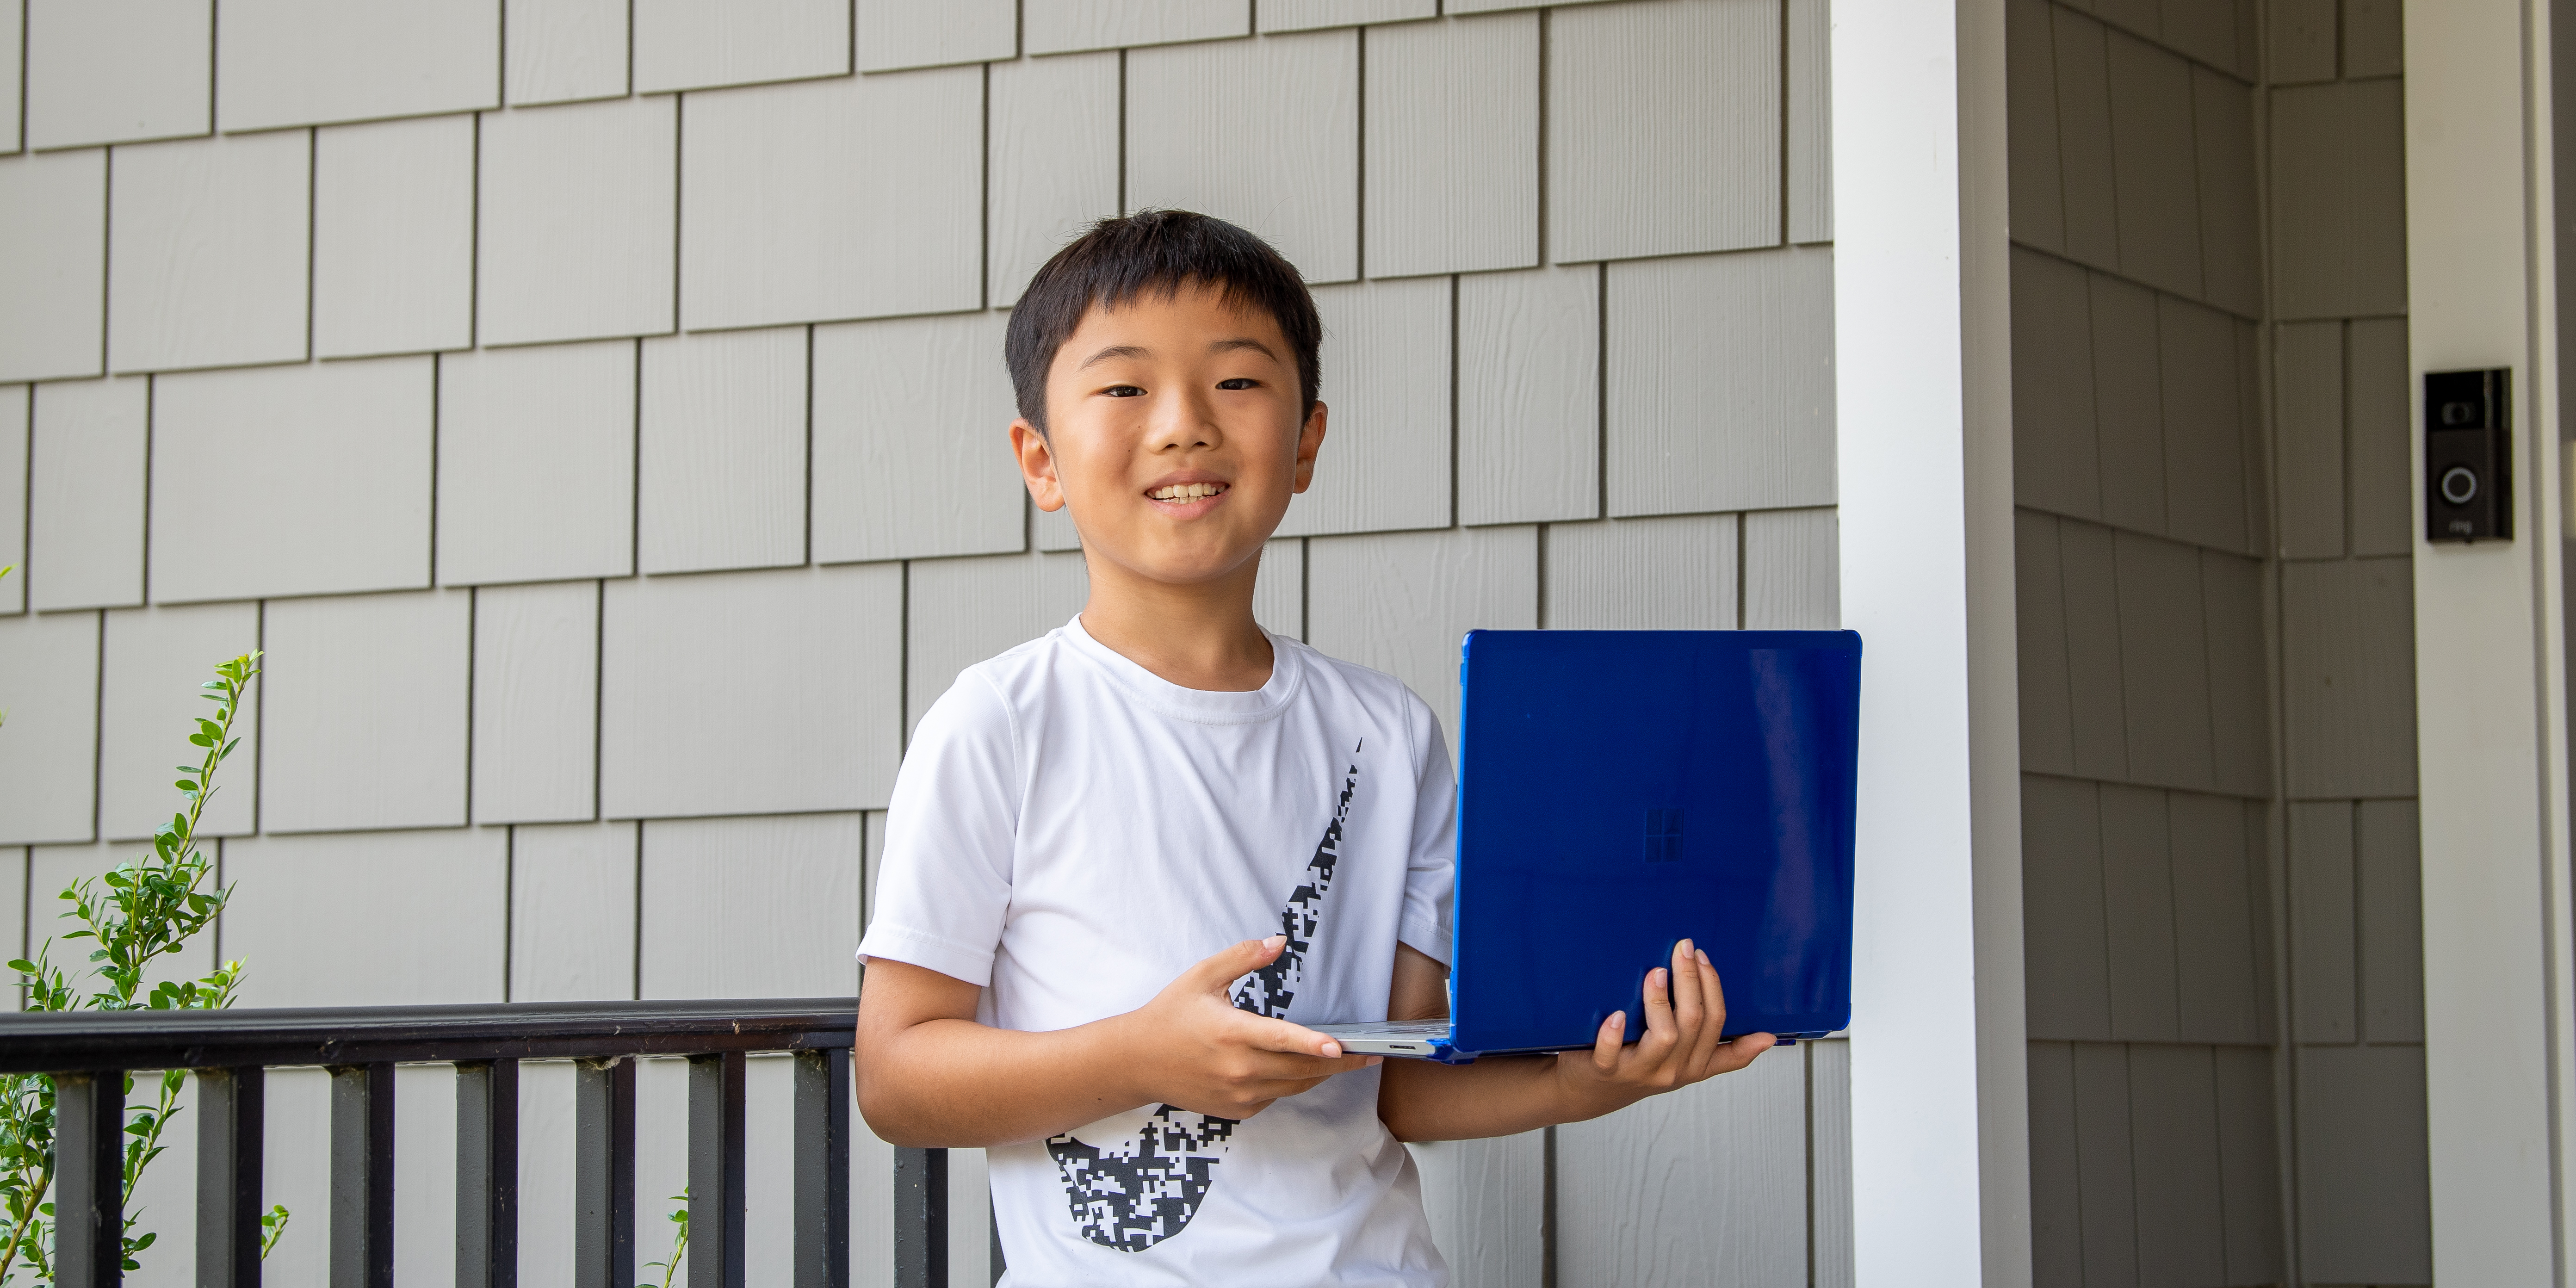 FCPS fourth-grader Ethan Zhang stands outside his home with his laptop.